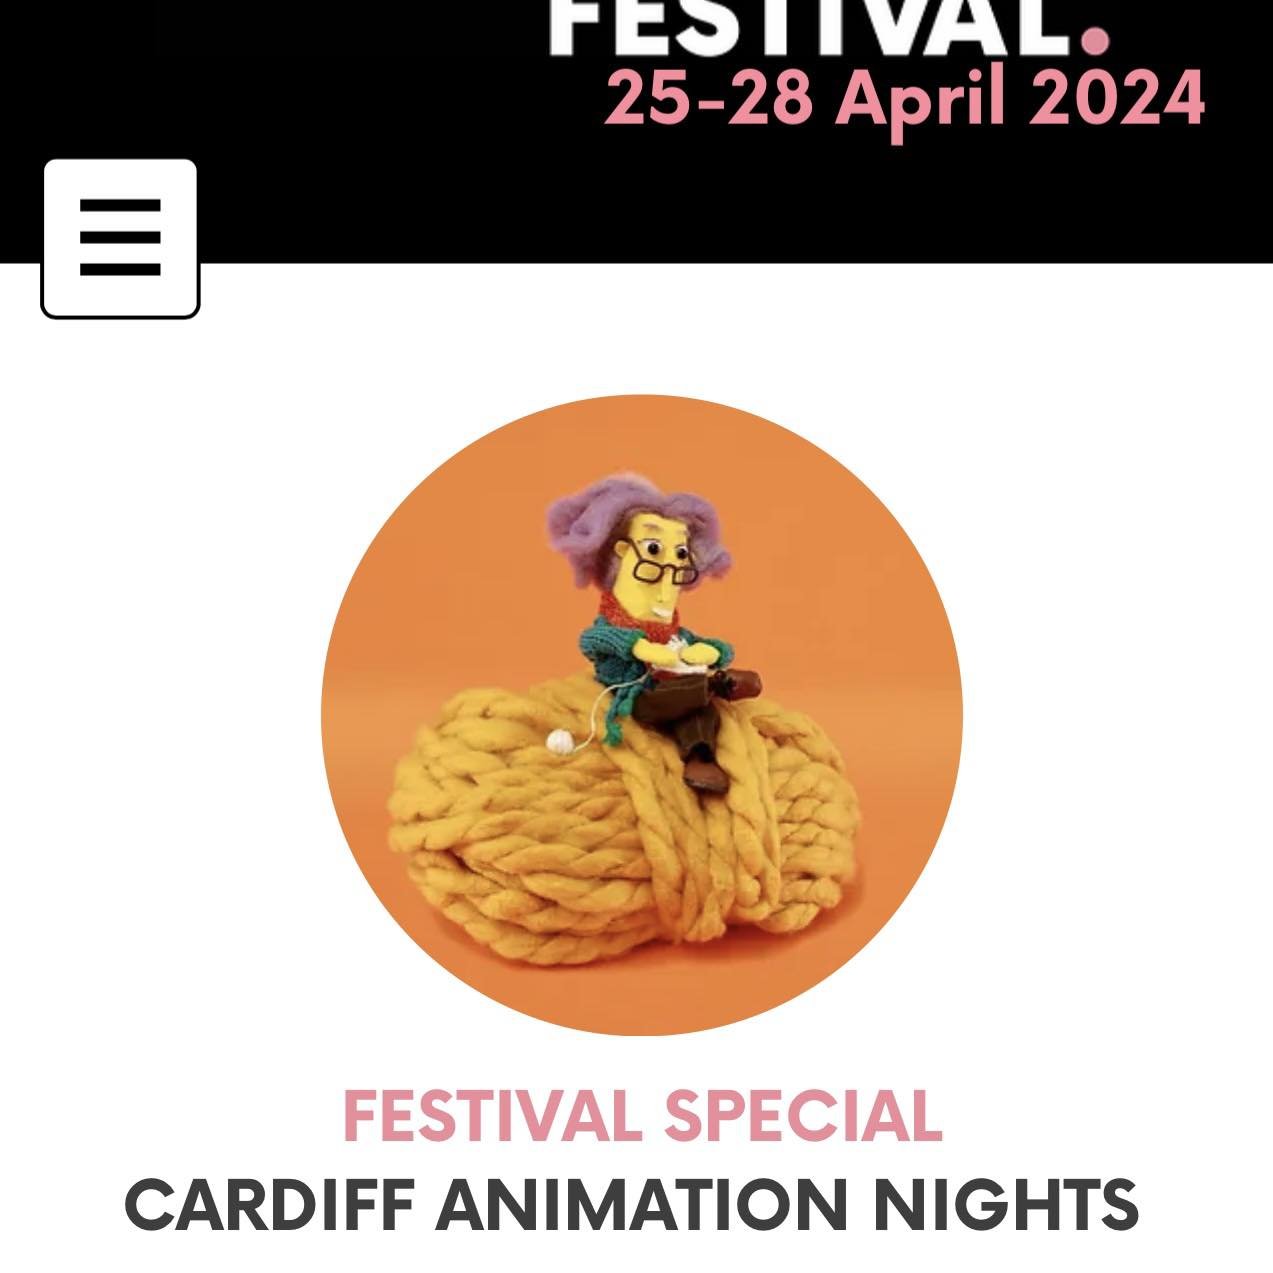 Over the weekend Handmade Happiness was part of @cardiffanimfest . Looks like it was a great event! I sure would have loved to see some of the puppet and model making demos 😍 

#stopmotion #animation #craft